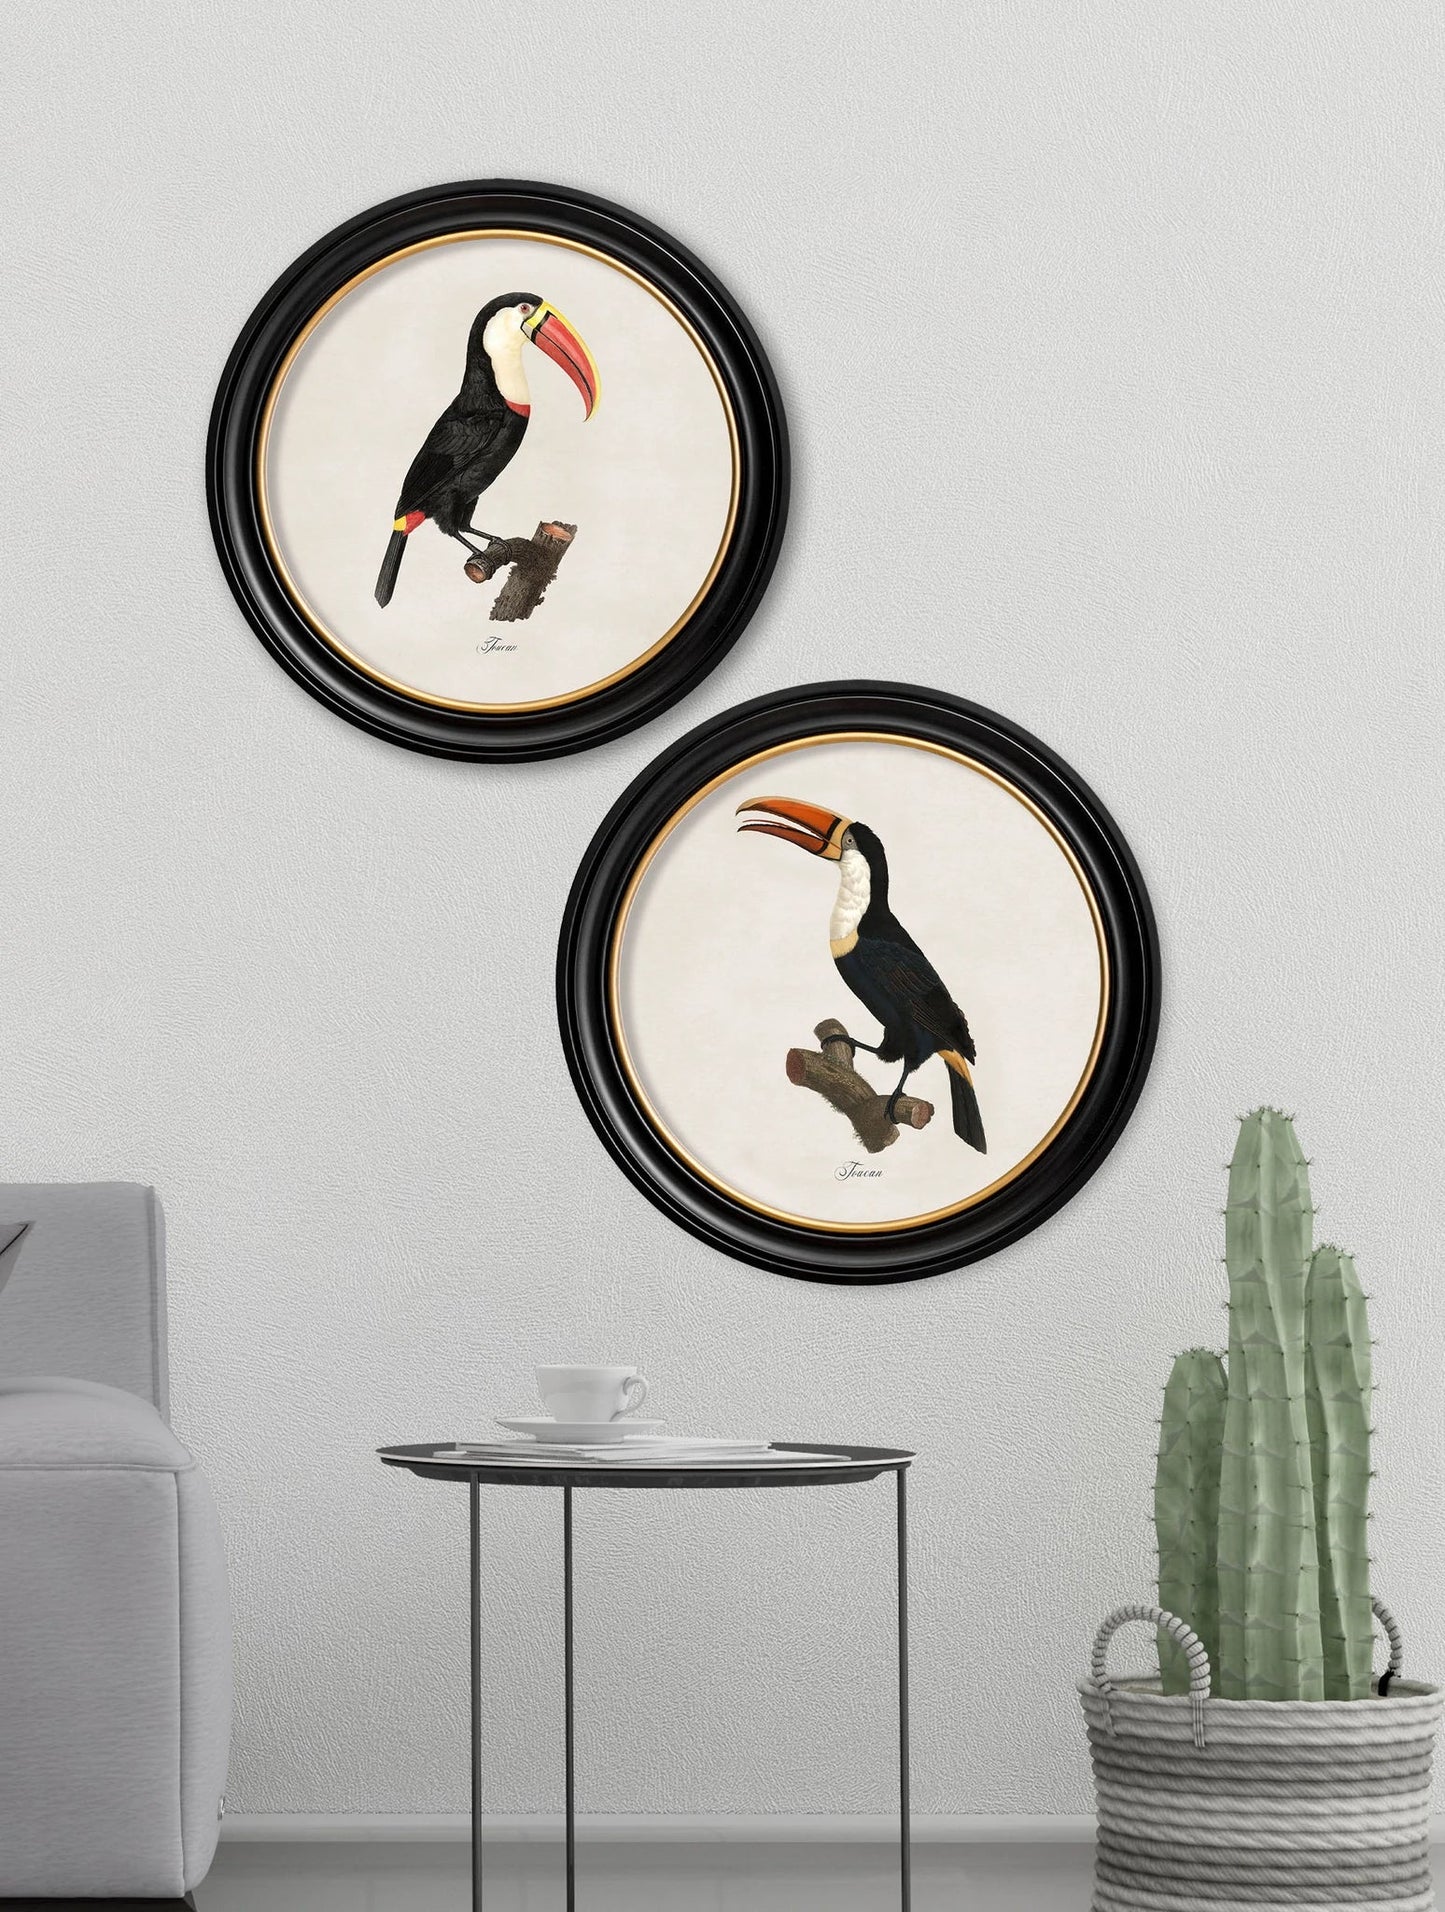 C.1809 Toucans - Round Frame for sale - Woodcock and Cavendish